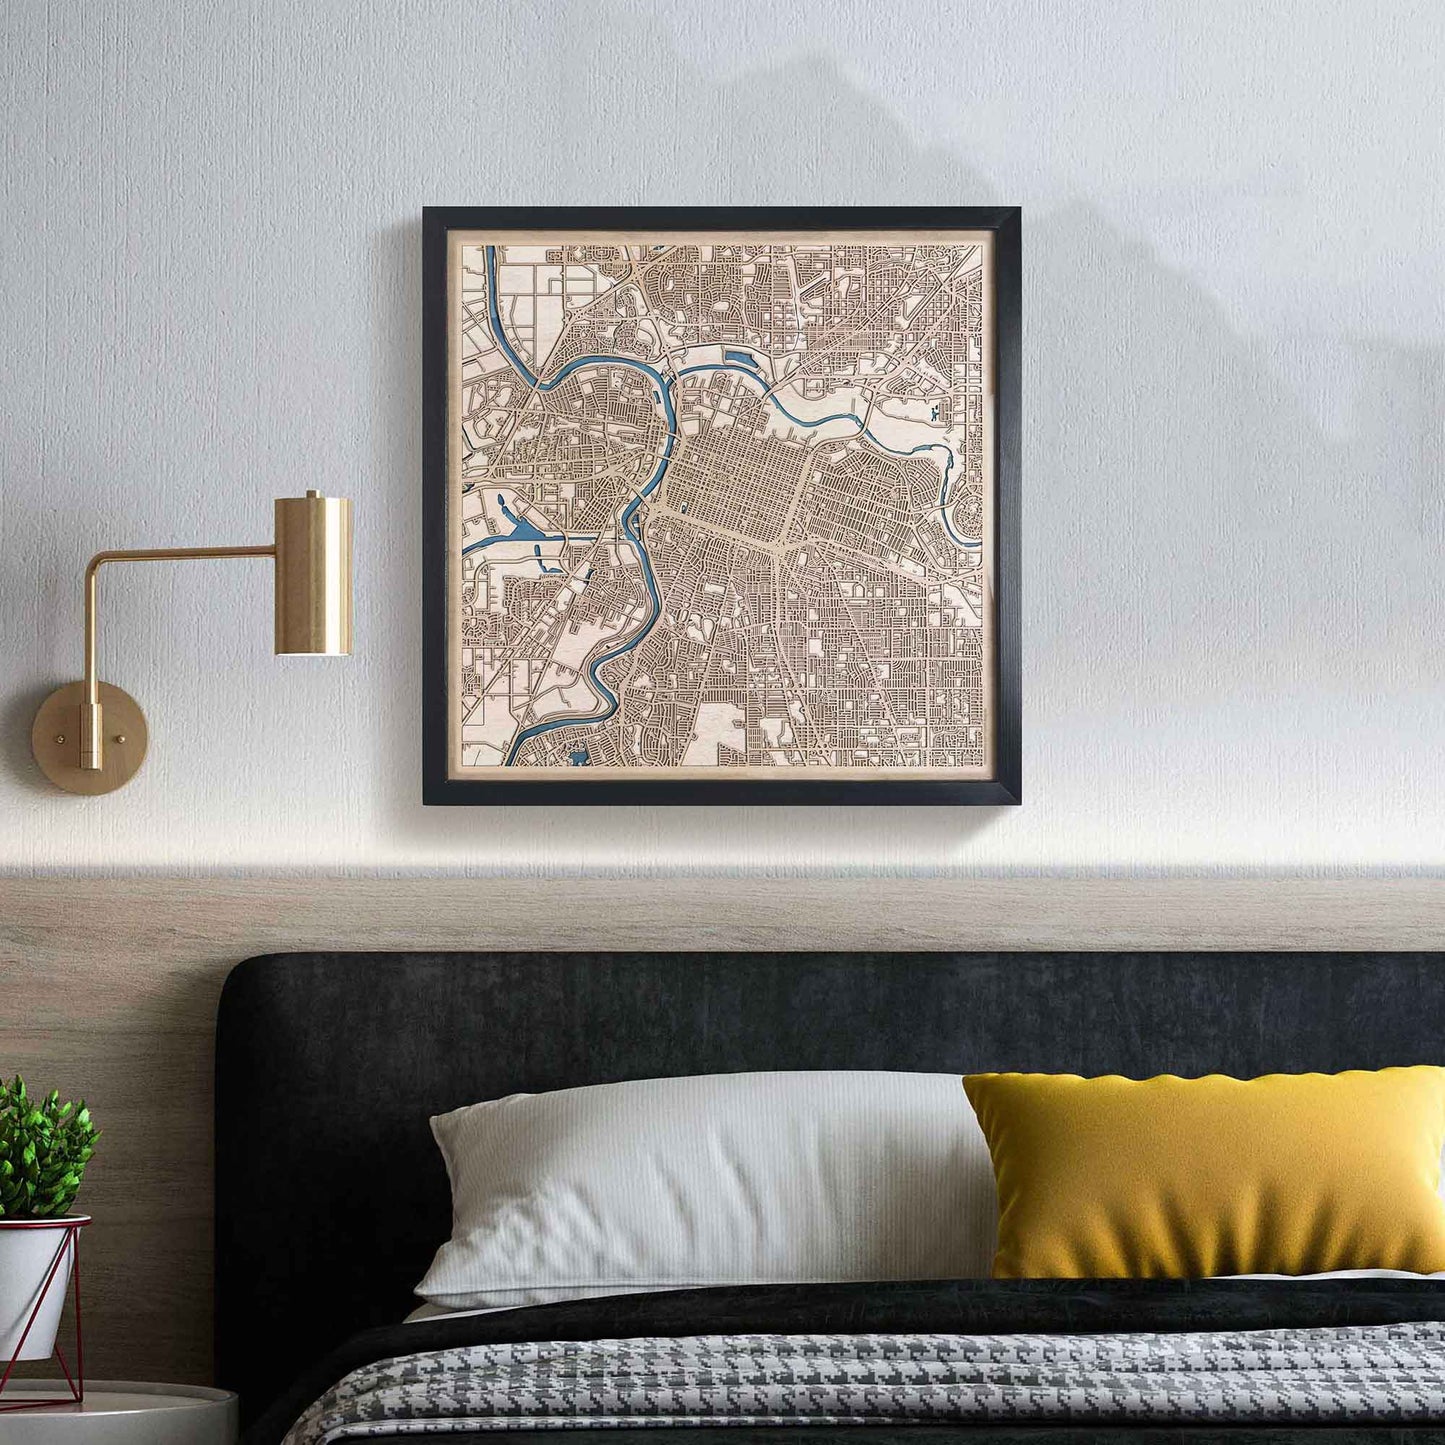 Sacramento Wooden Map by CityWood - Custom Wood Map Art - Unique Laser Cut Engraved - Anniversary Gift